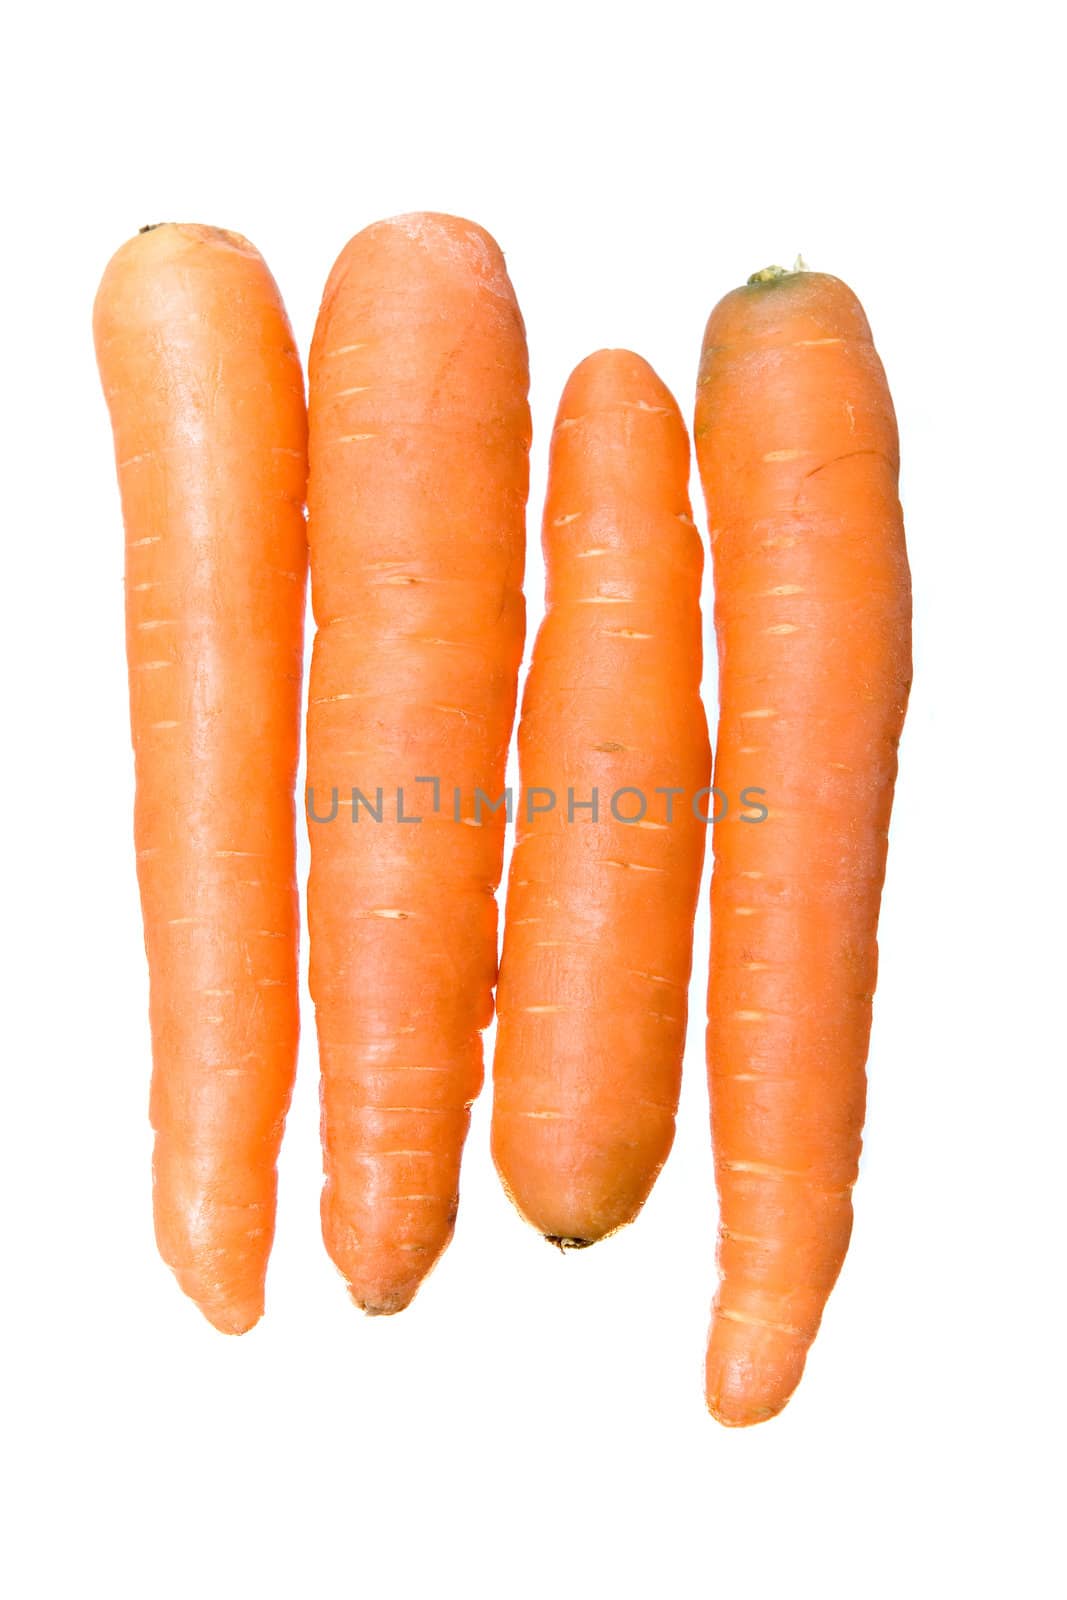 Four carrots on a white background